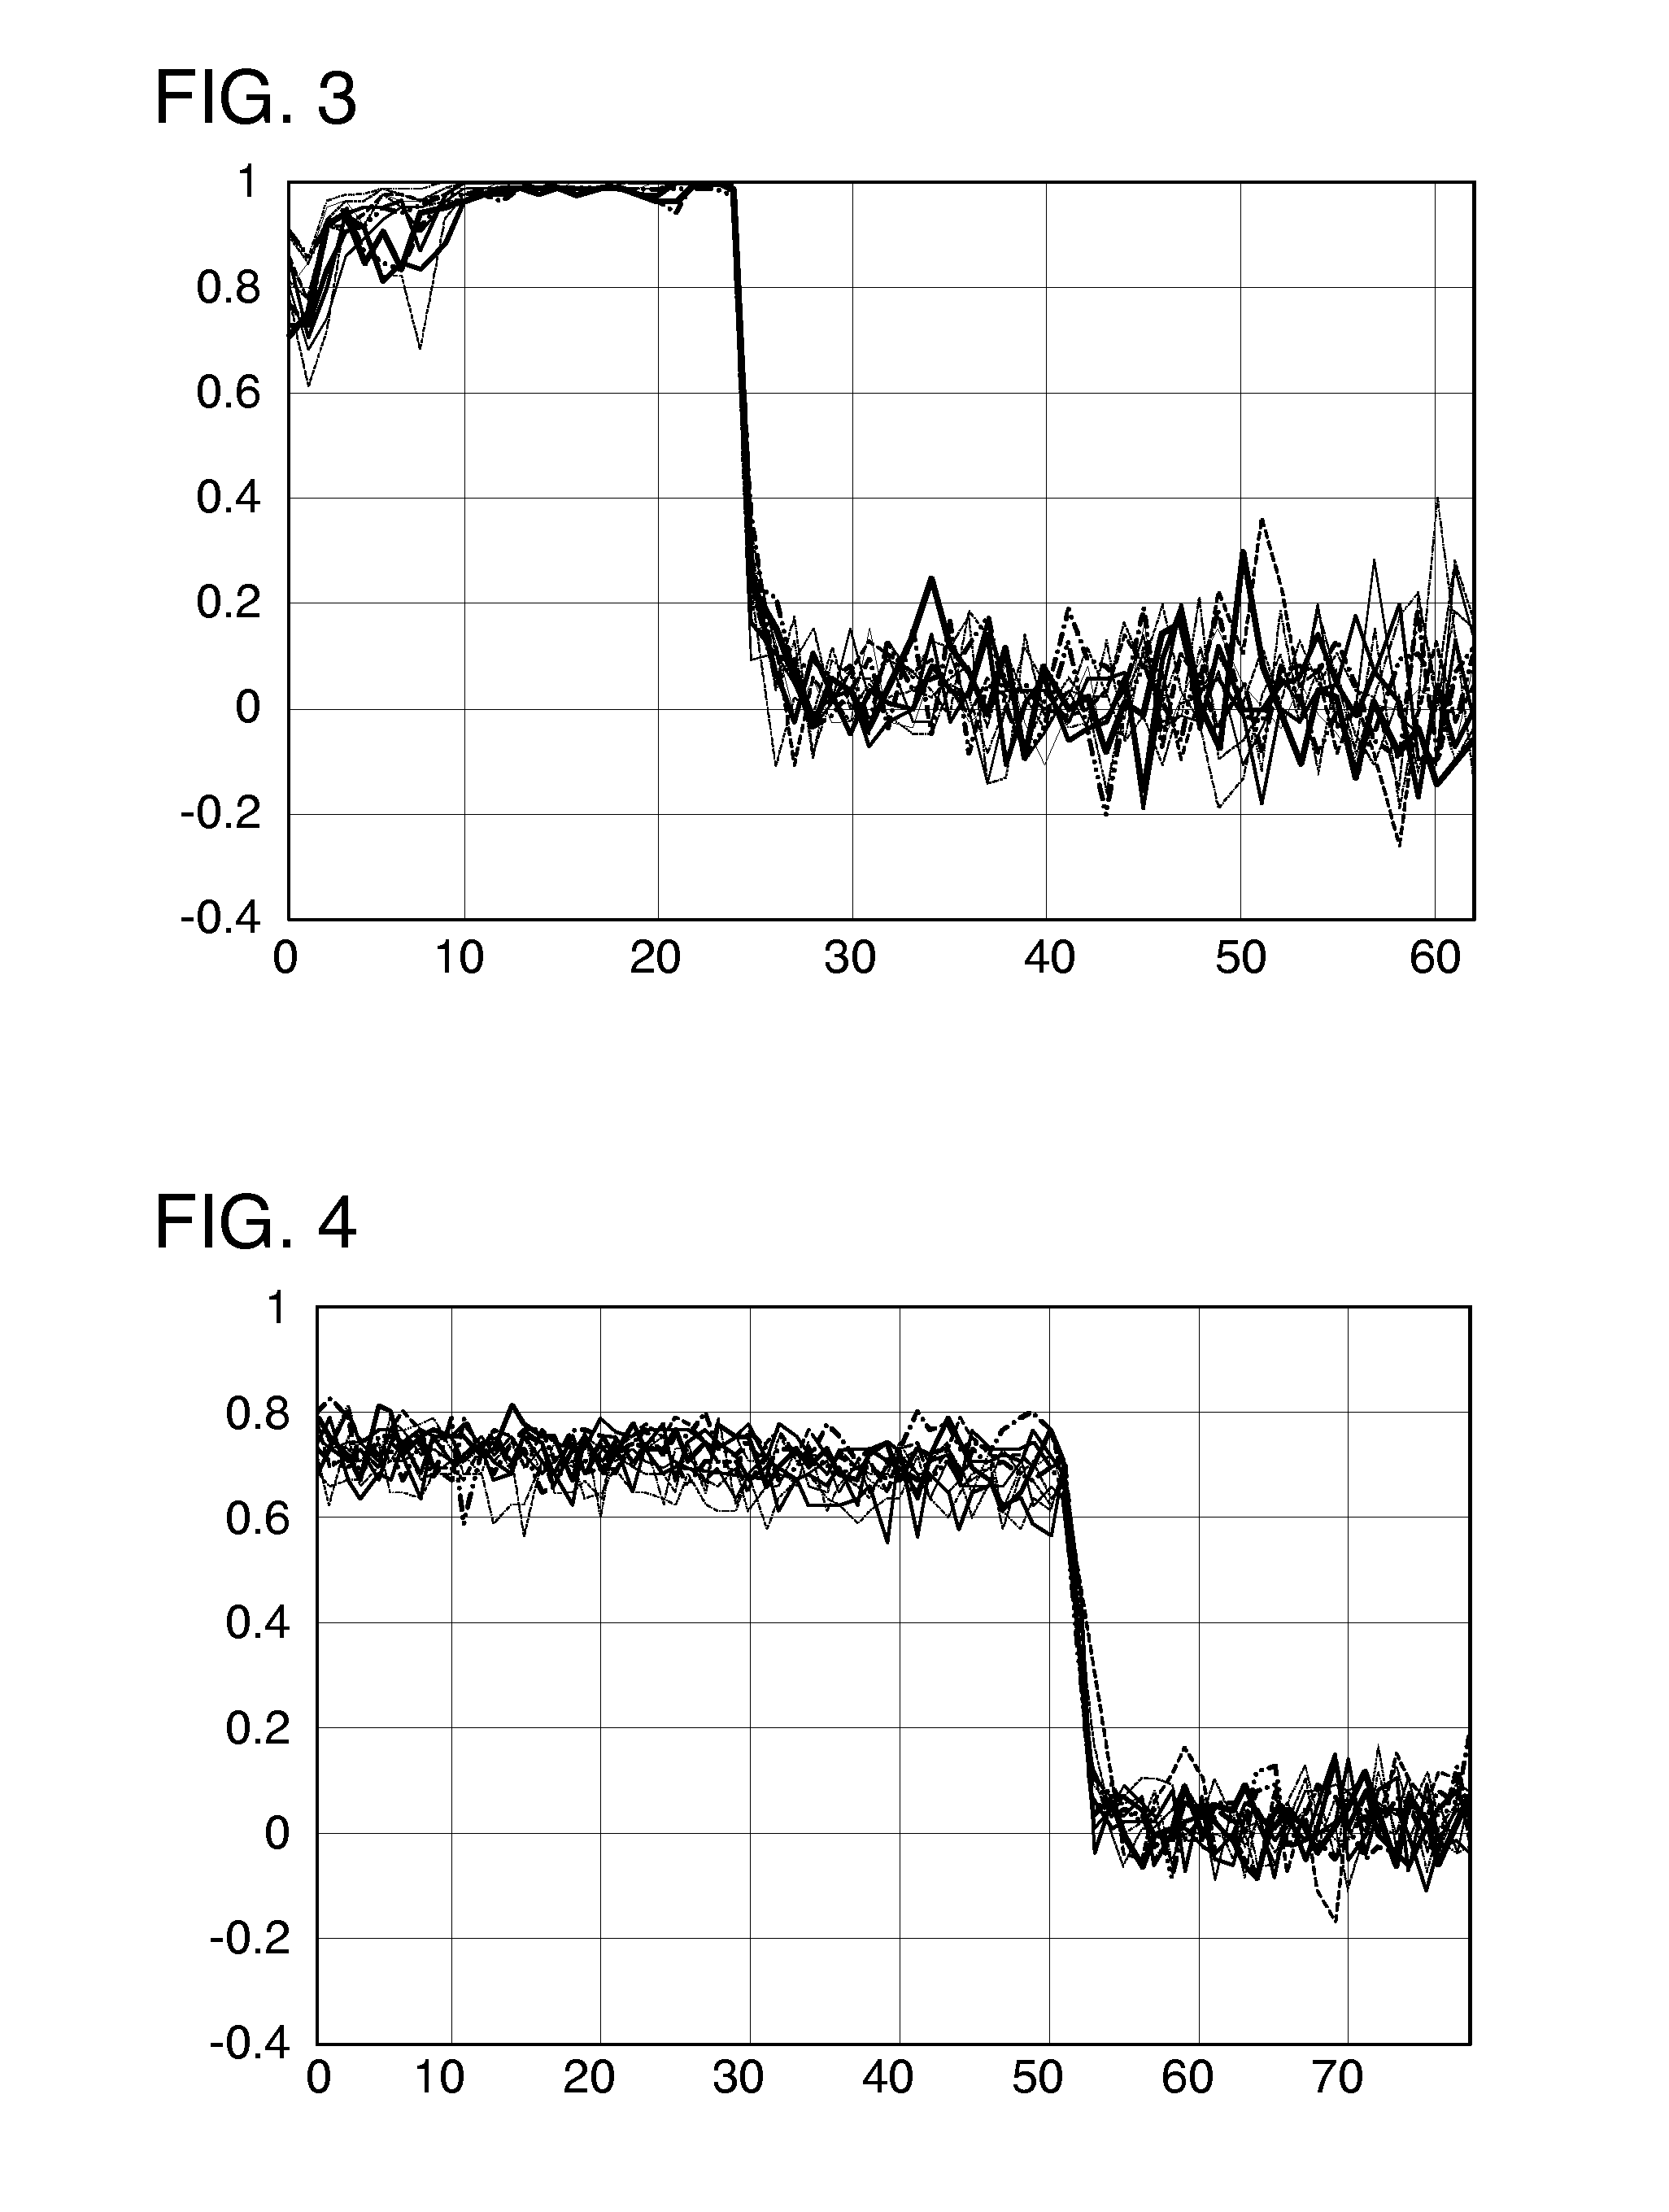 Flame monitoring of a gas turbine combustor using a characteristic spectral pattern from a dynamic pressure sensor in the combustor